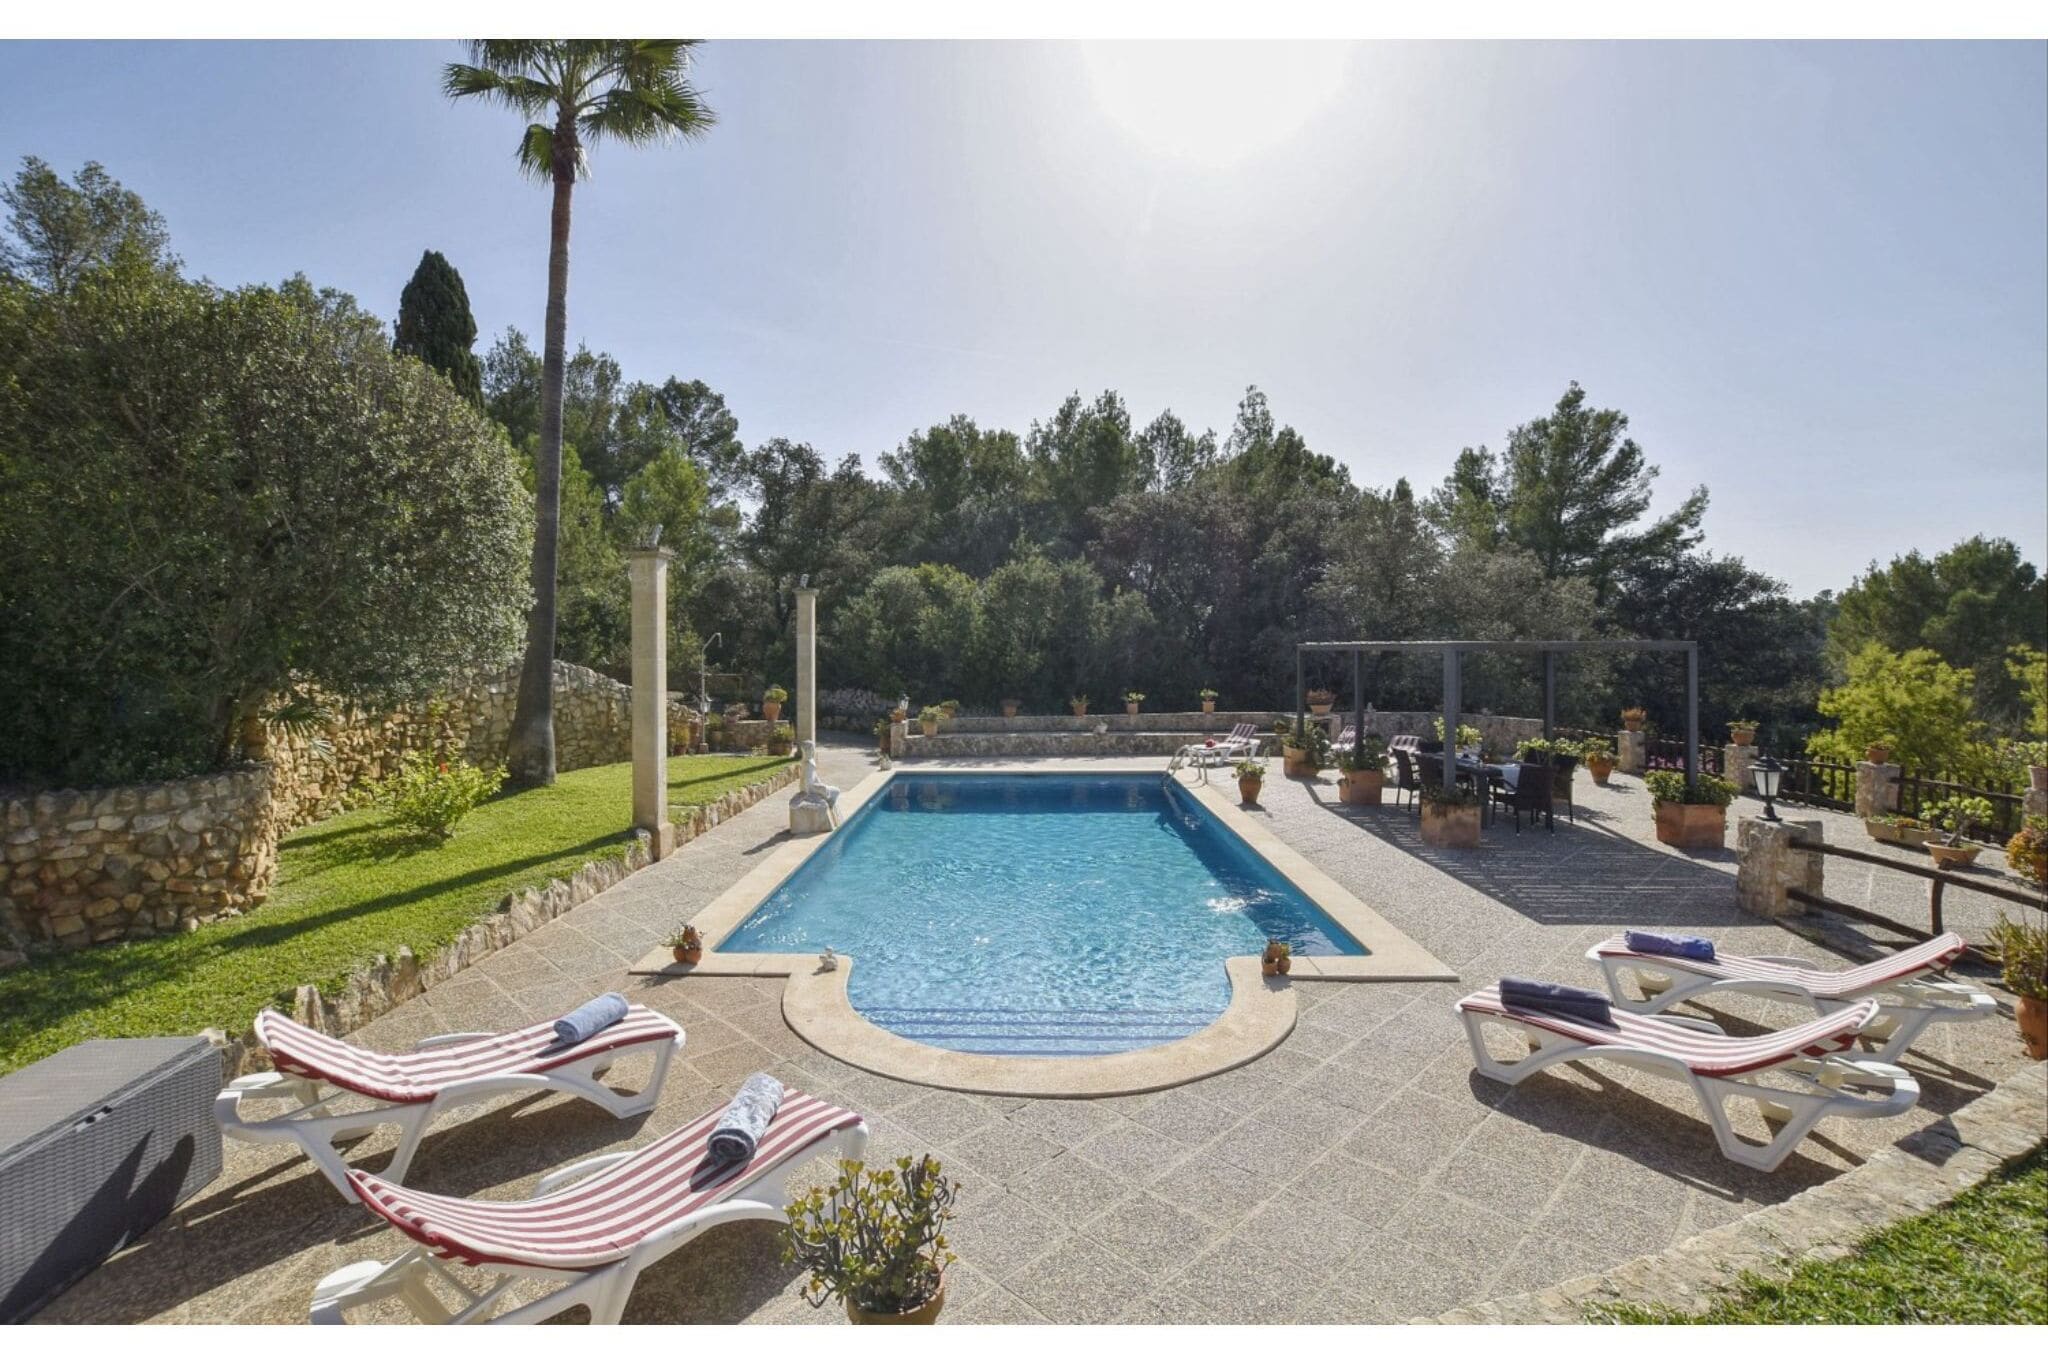 Rustic style villa located in the beautiful Mallorcan town of Sineu